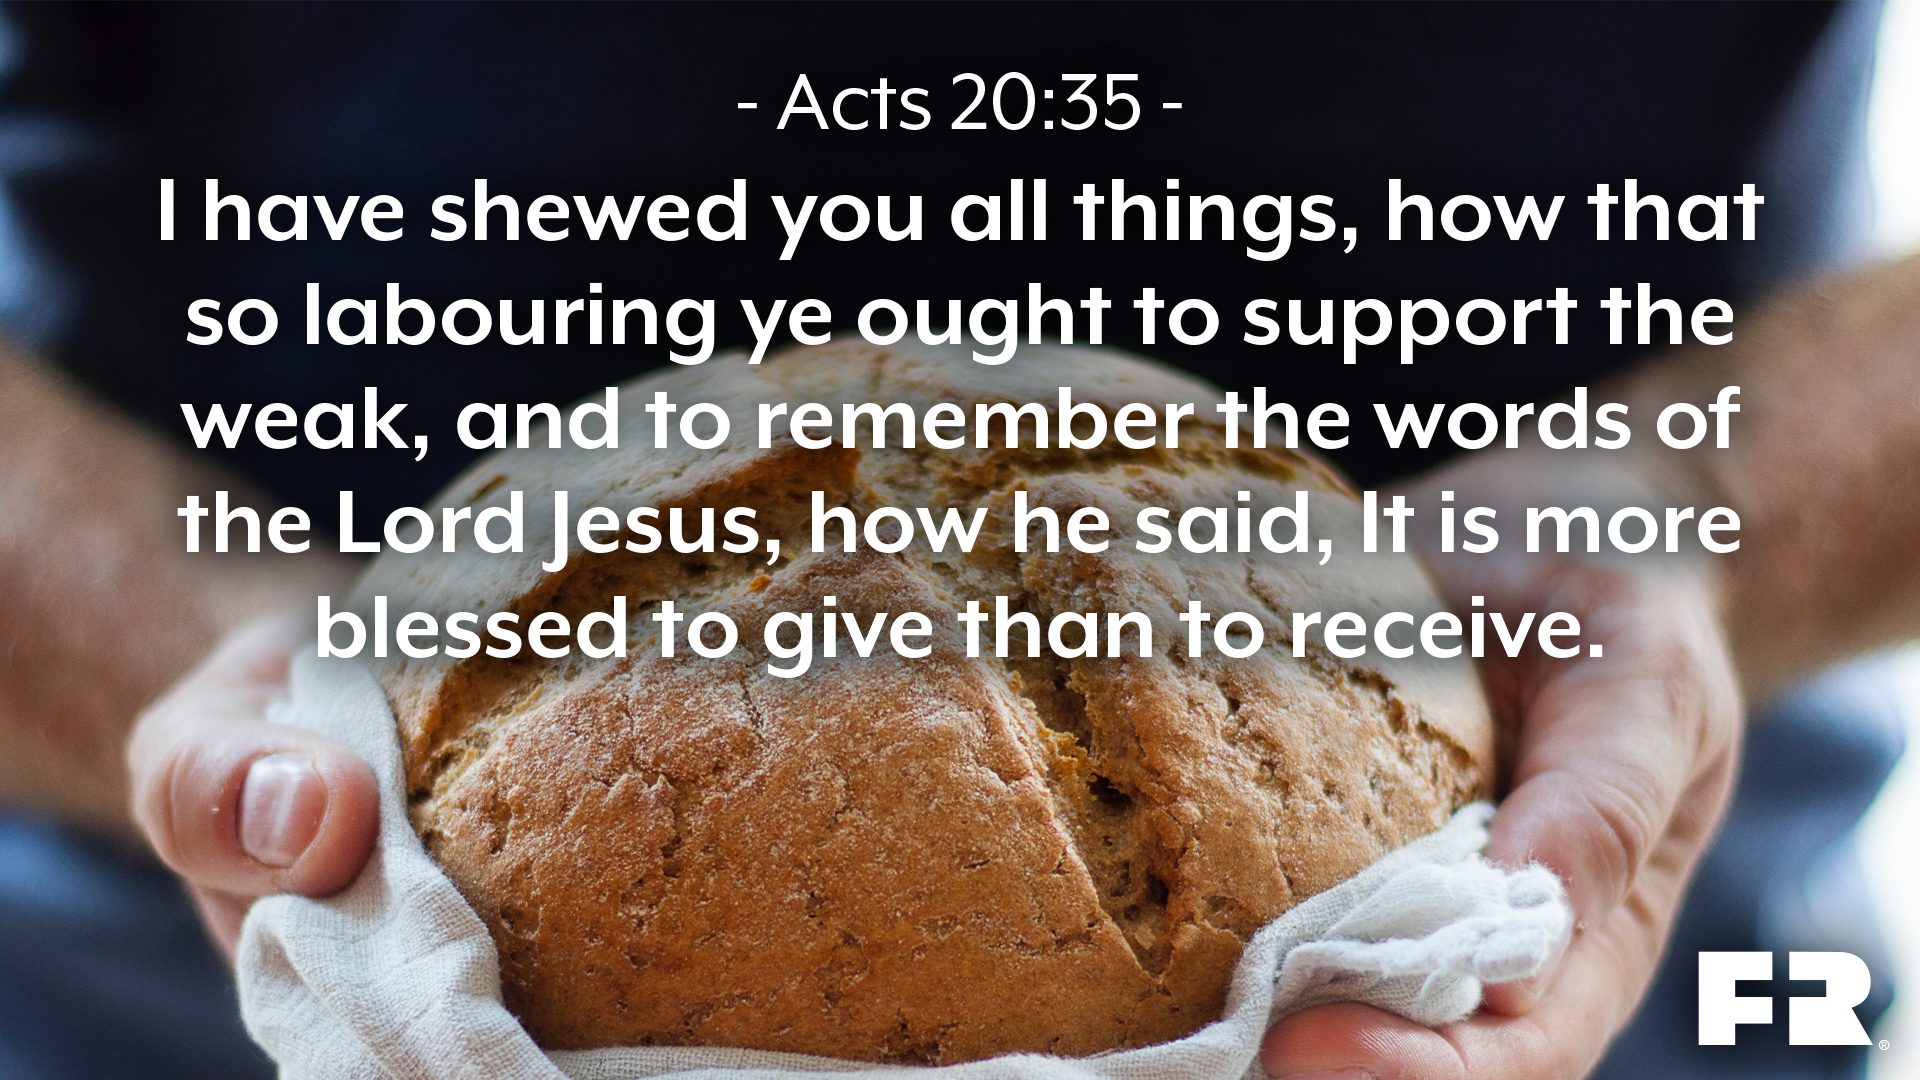 “I have shewed you all things, how that so labouring ye ought to support the weak, and to remember the words of the Lord Jesus, how he said, It is more blessed to give than to receive.”